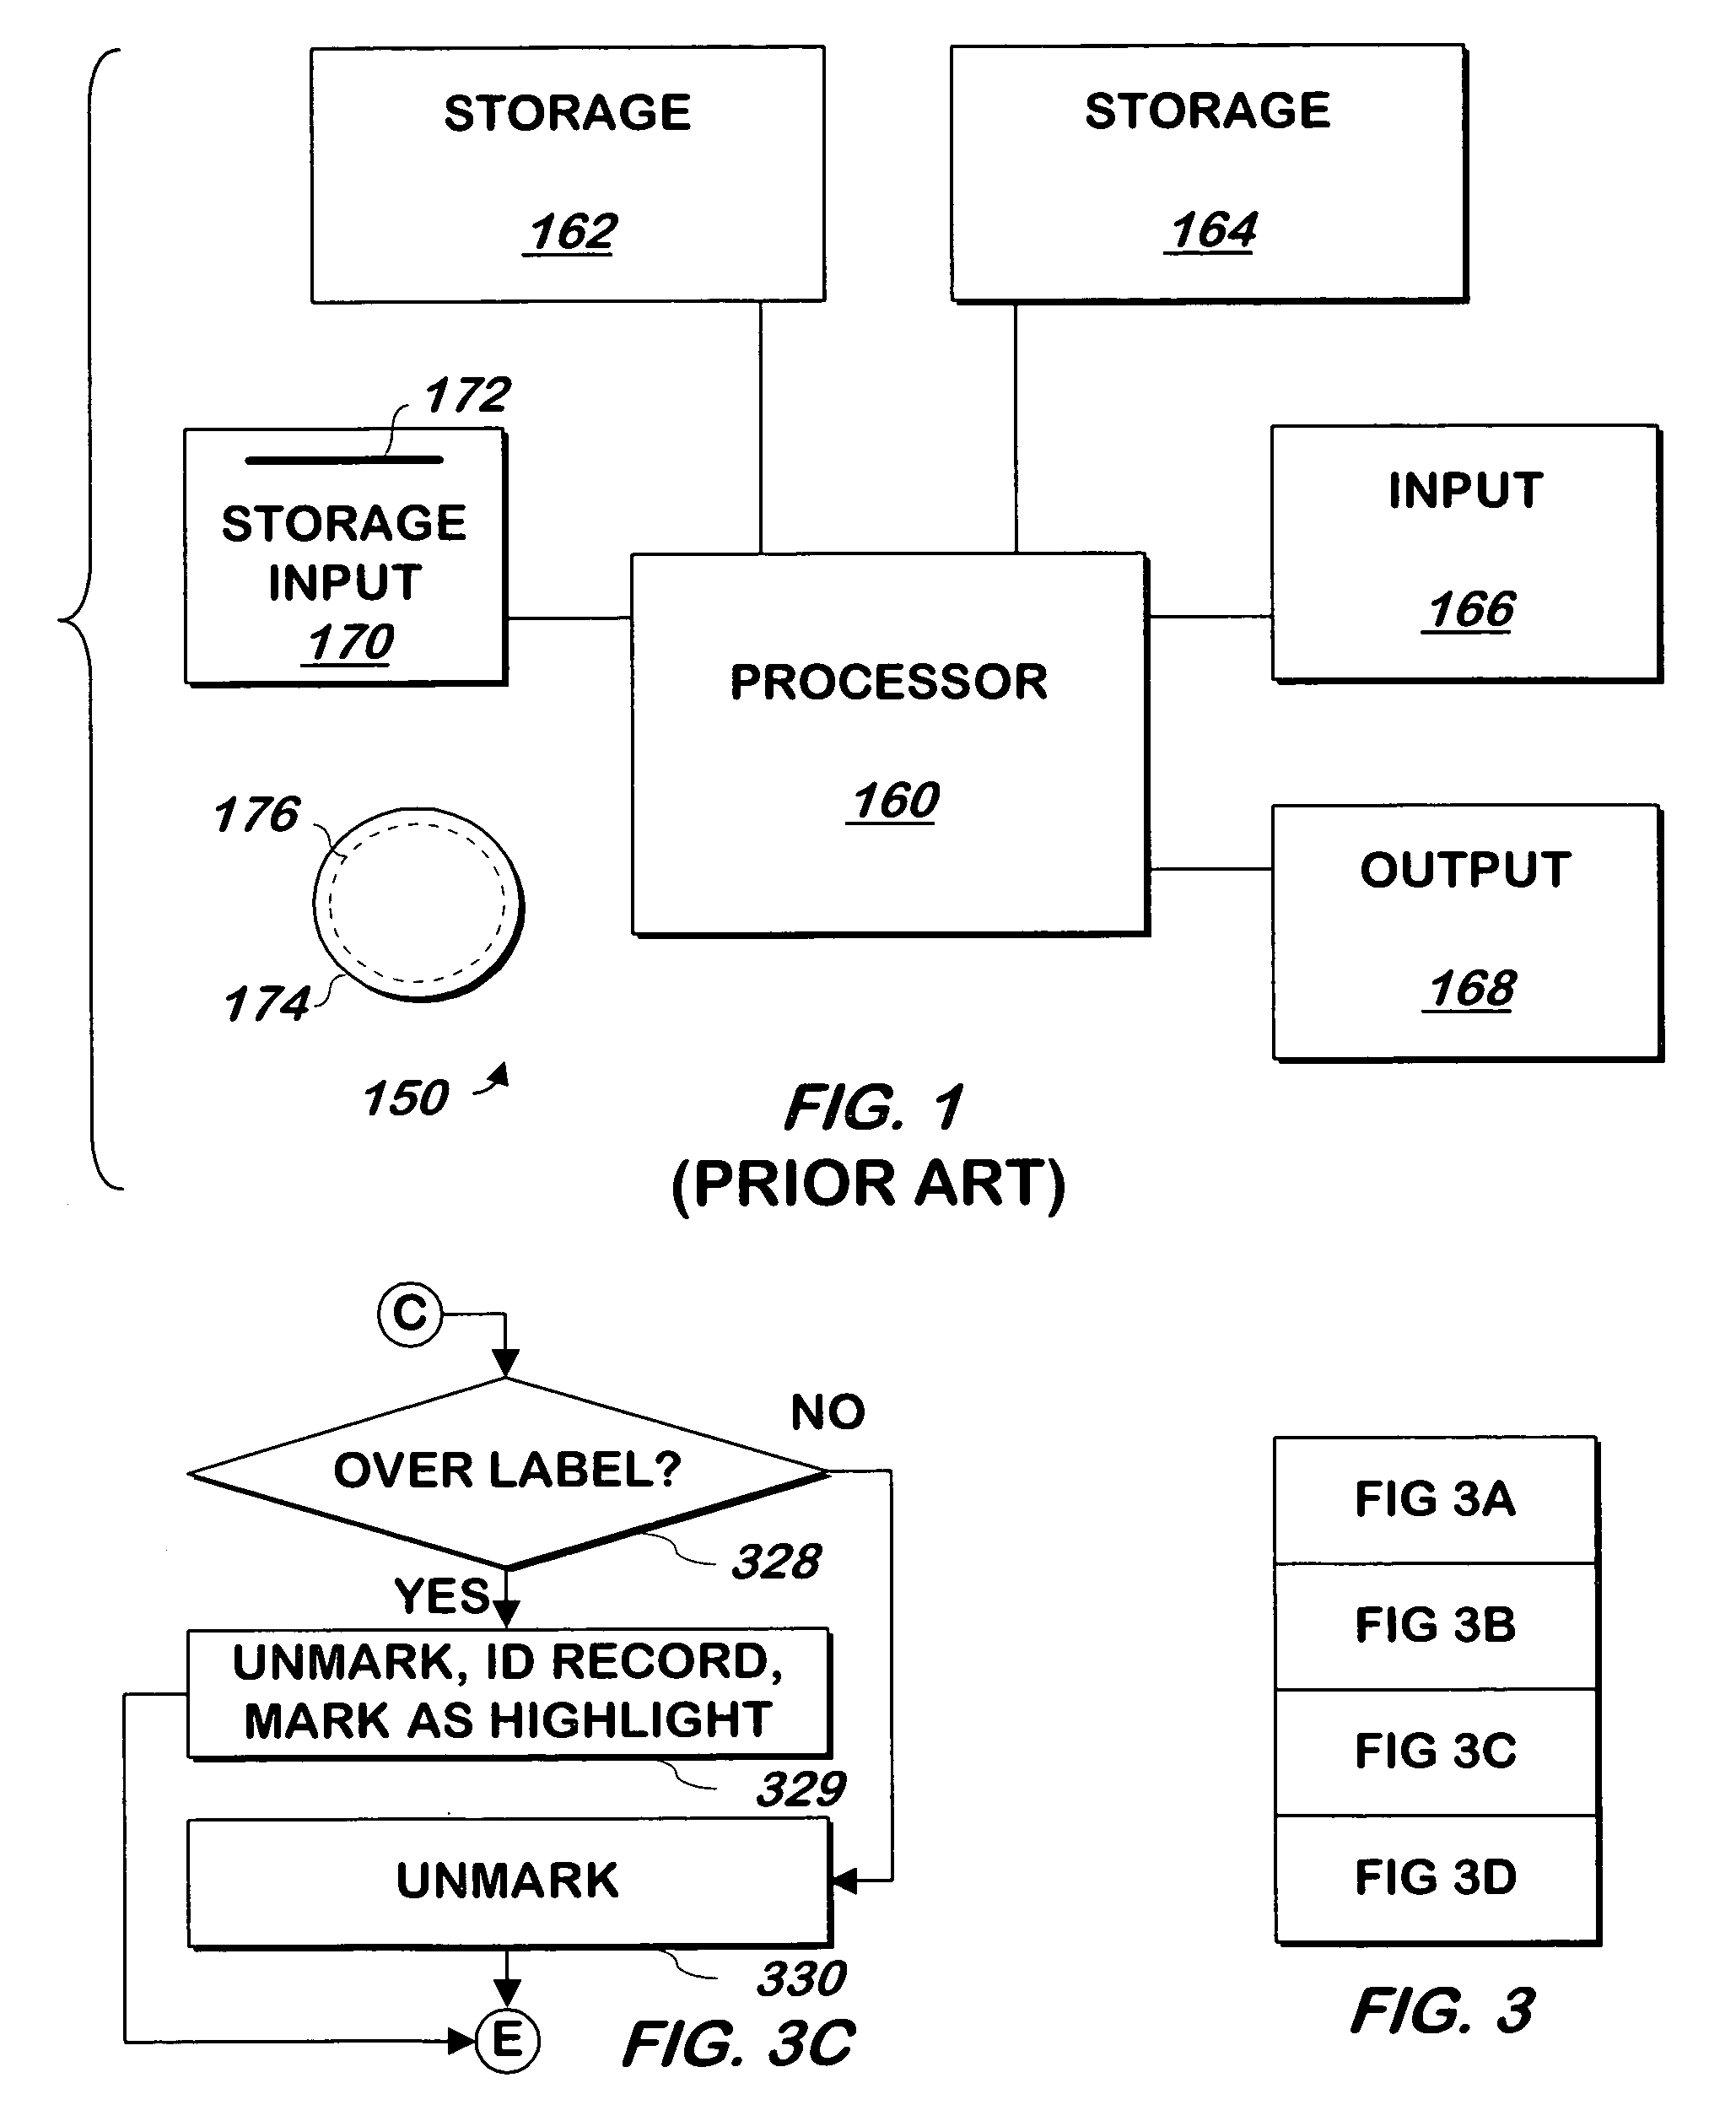 System and method for displaying elements using a single tab